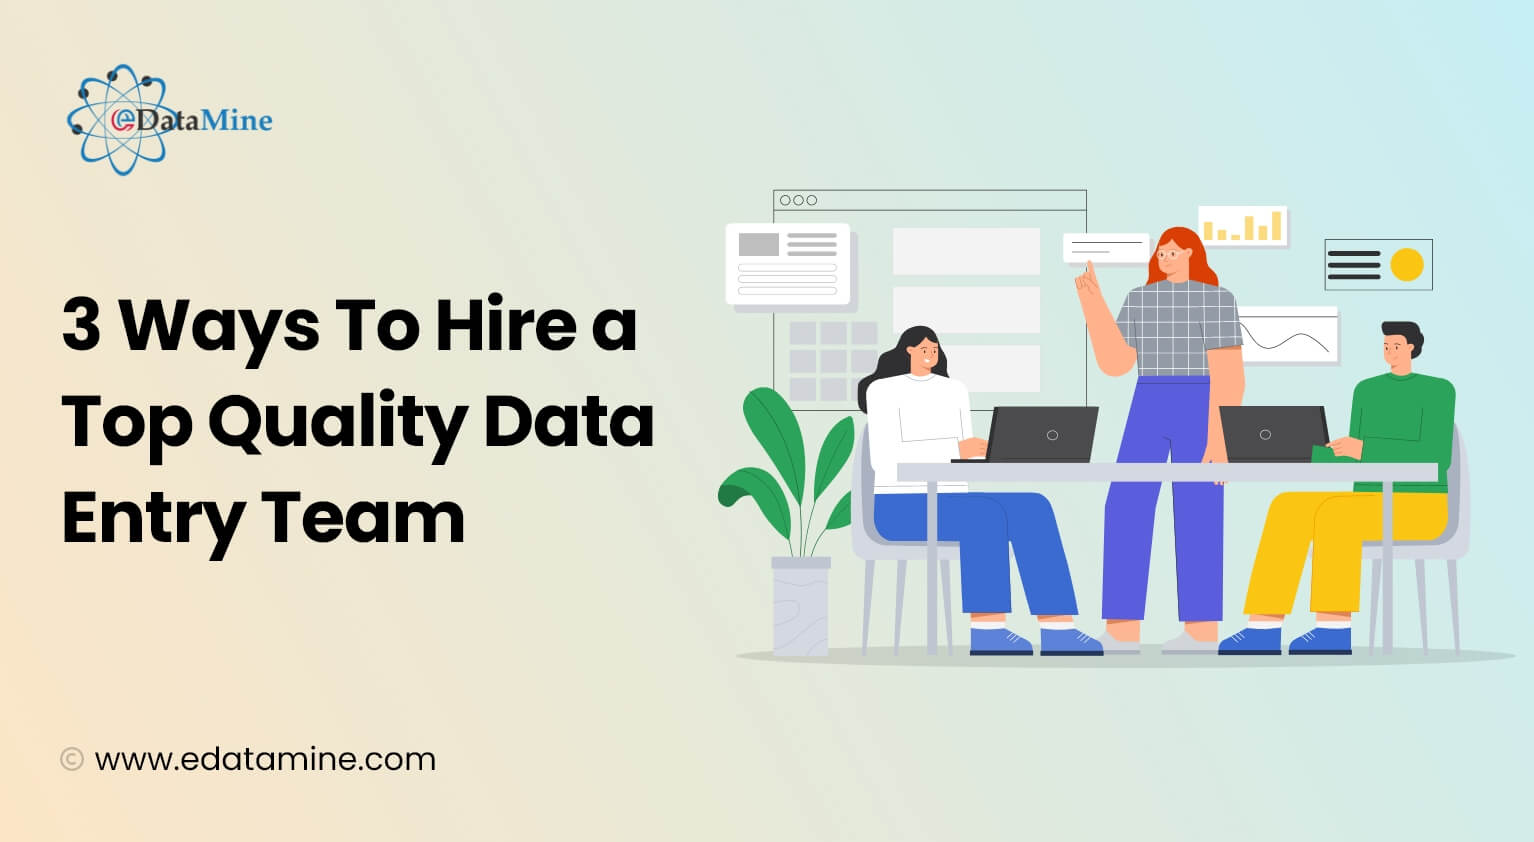 3 Ways To Hire a Top Quality Data Entry Team